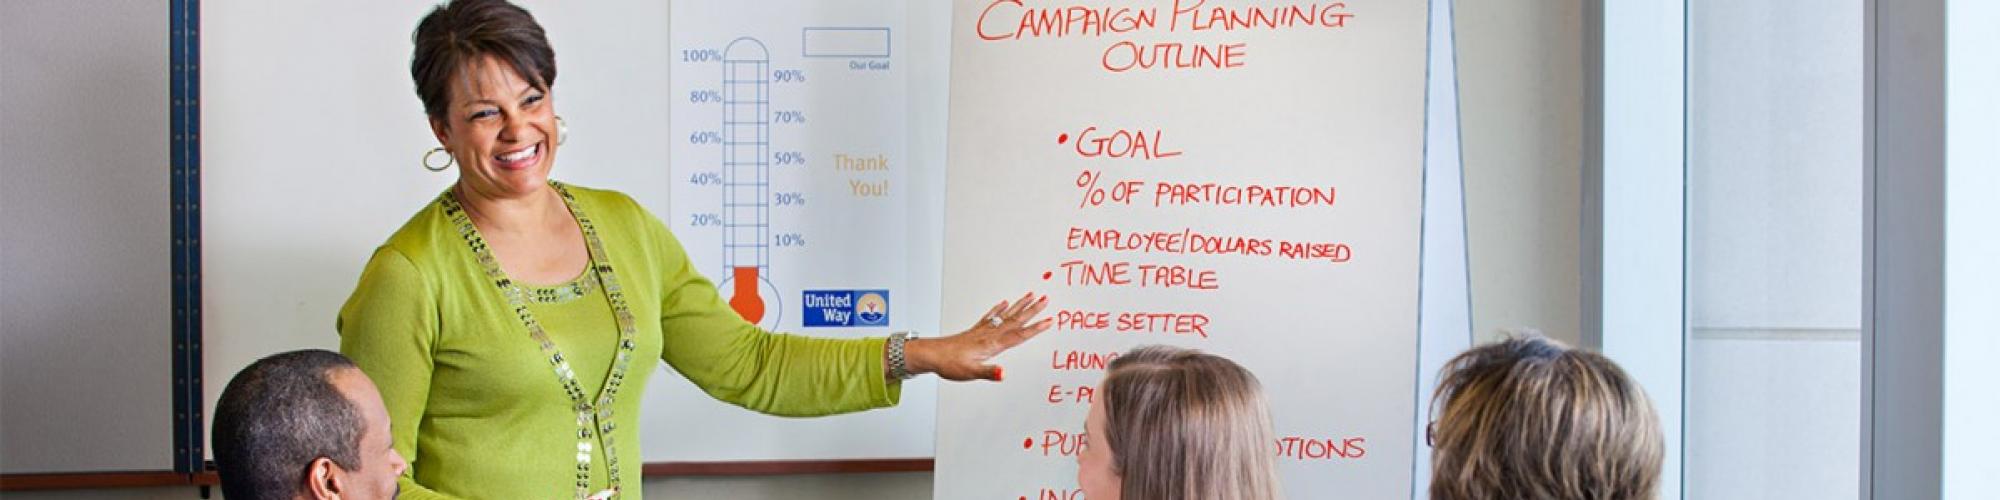 a woman points at a campaign timeline while talking to co-workers